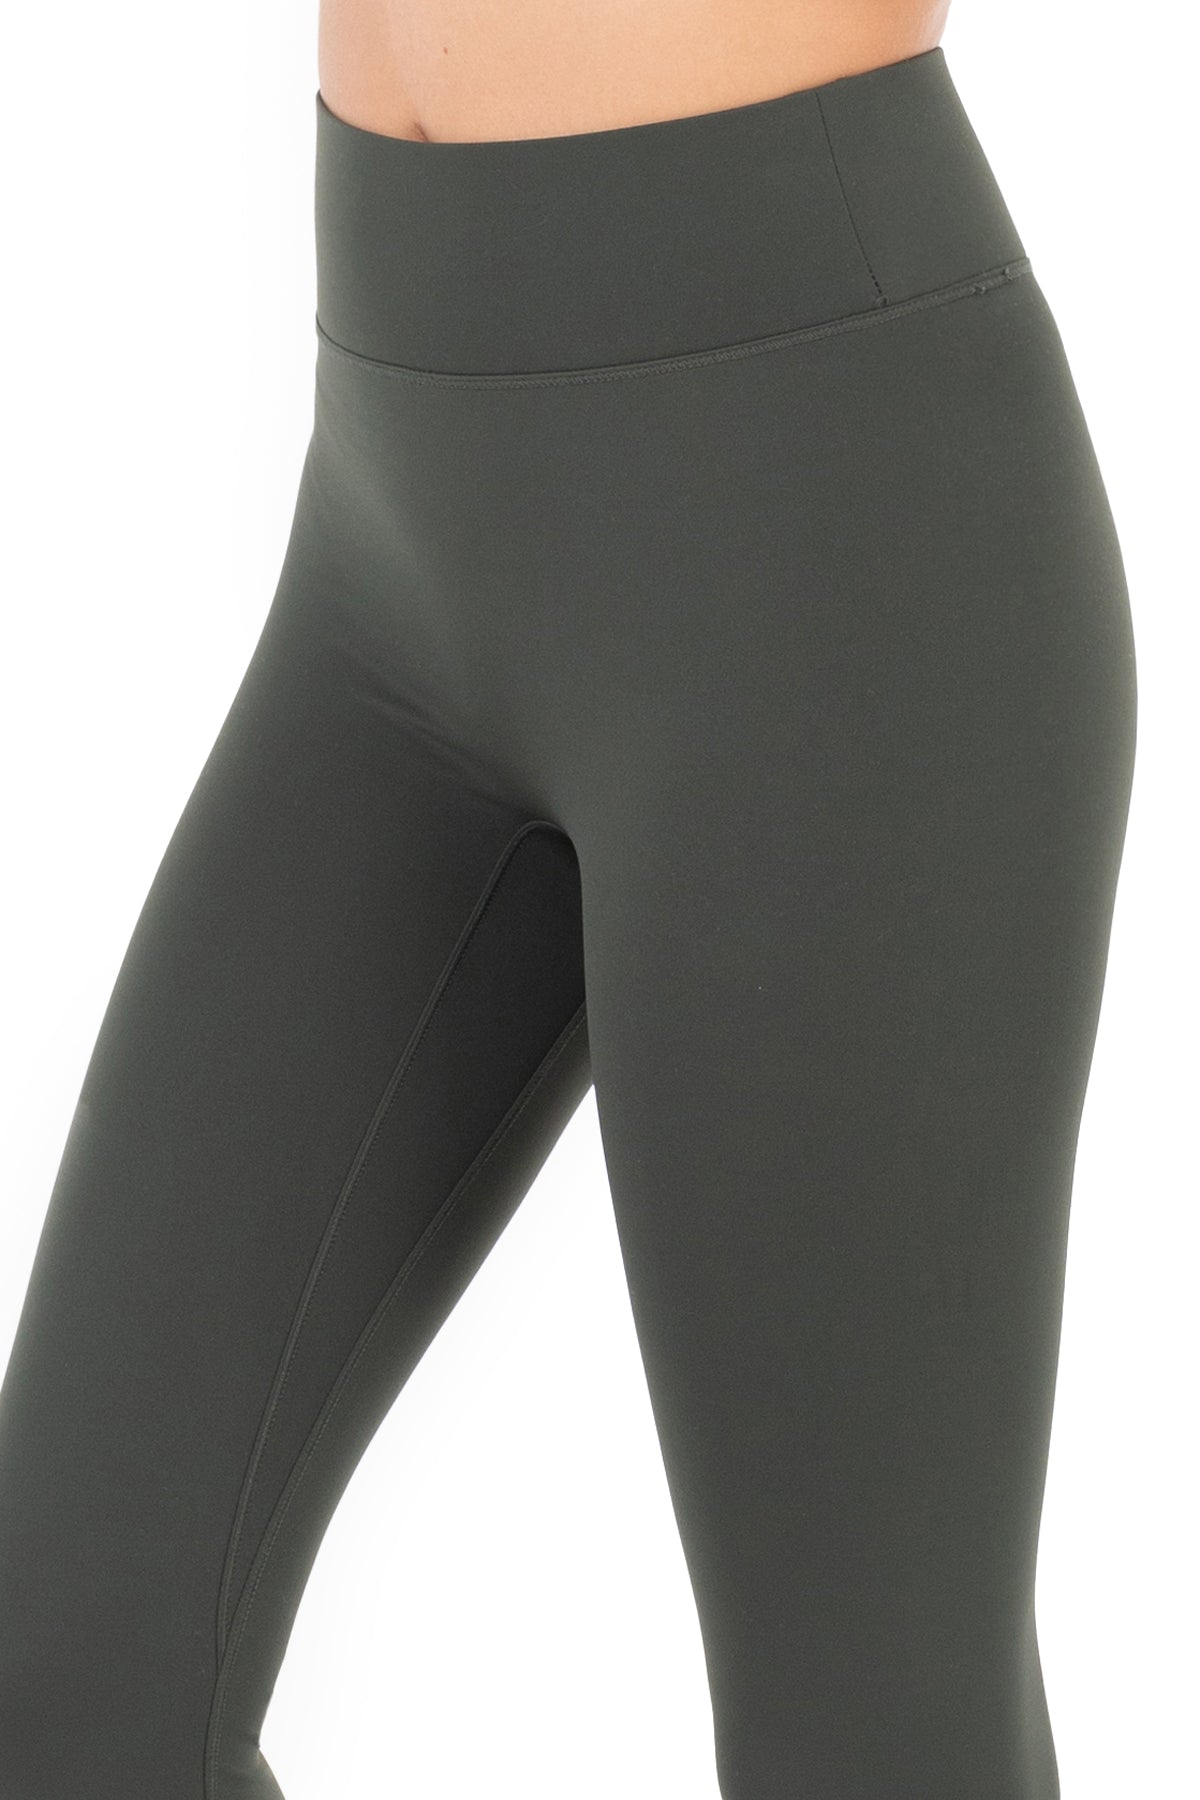 Women's Shiny Sport Leggings High Rise Breathable Compressive Push Up  Iridescent Activewears